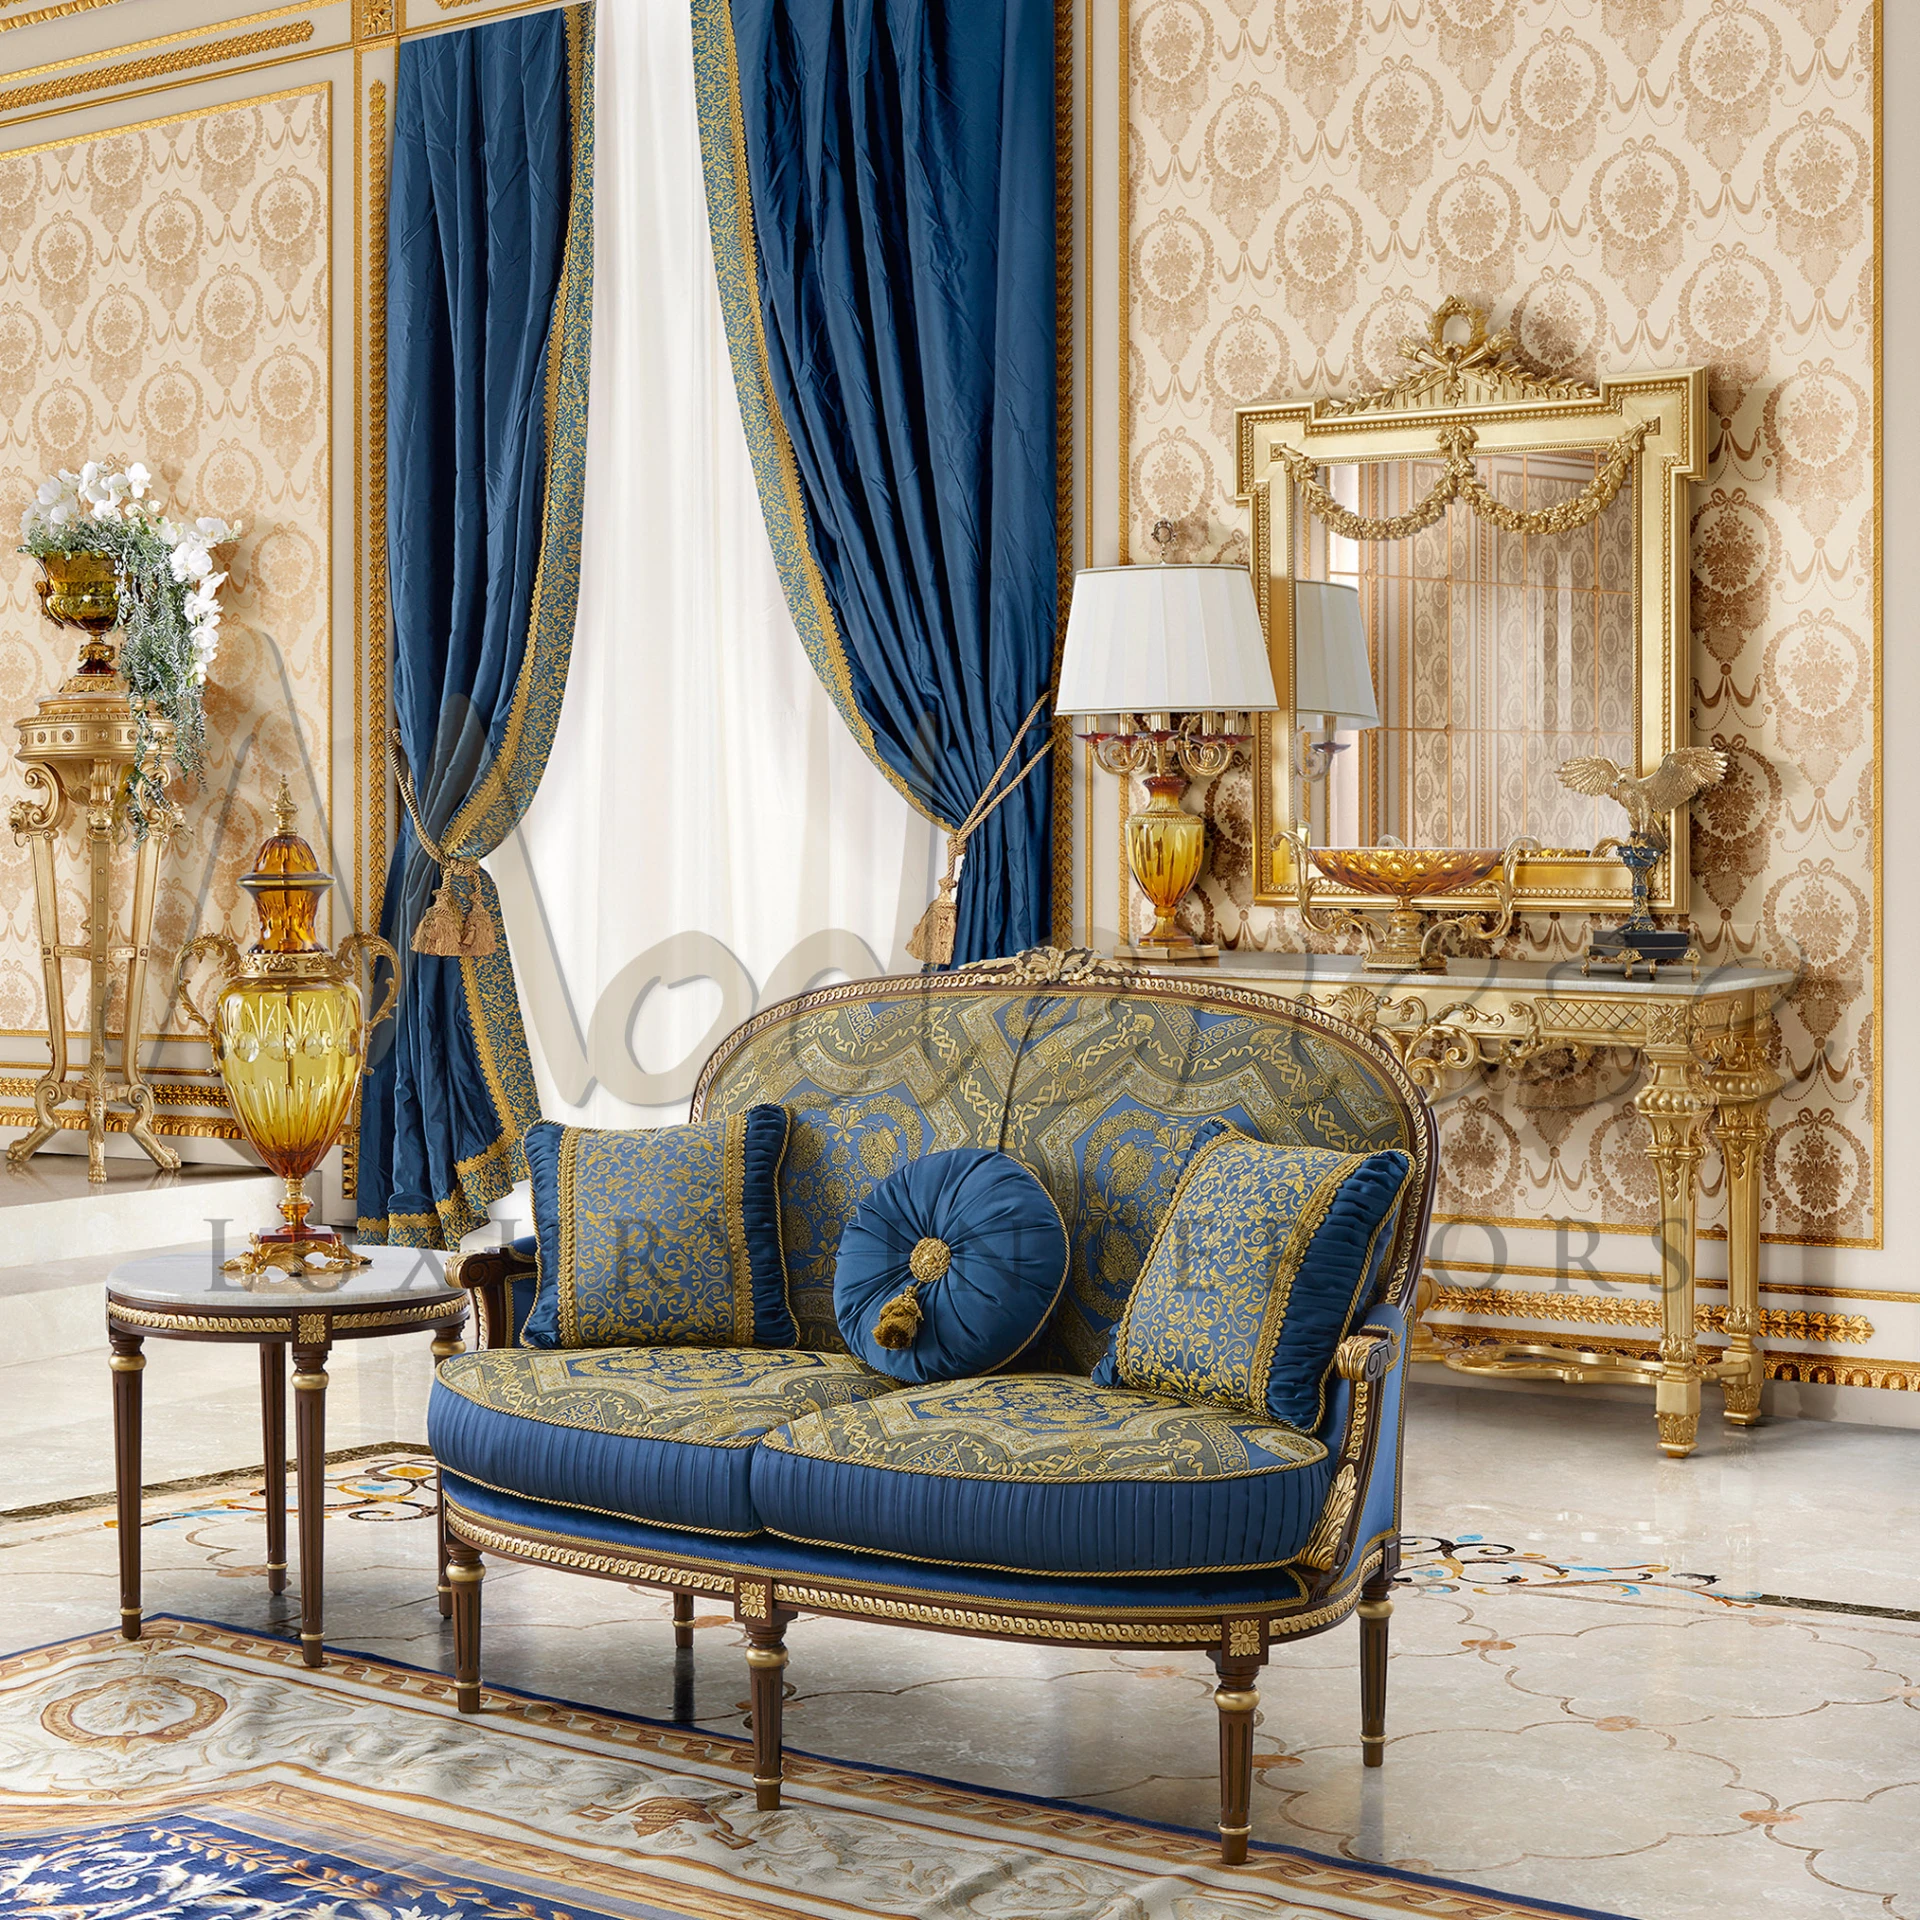 Luxurious lounge with a blue and golden sofa, classical Italian table lamp, and classic draperies.